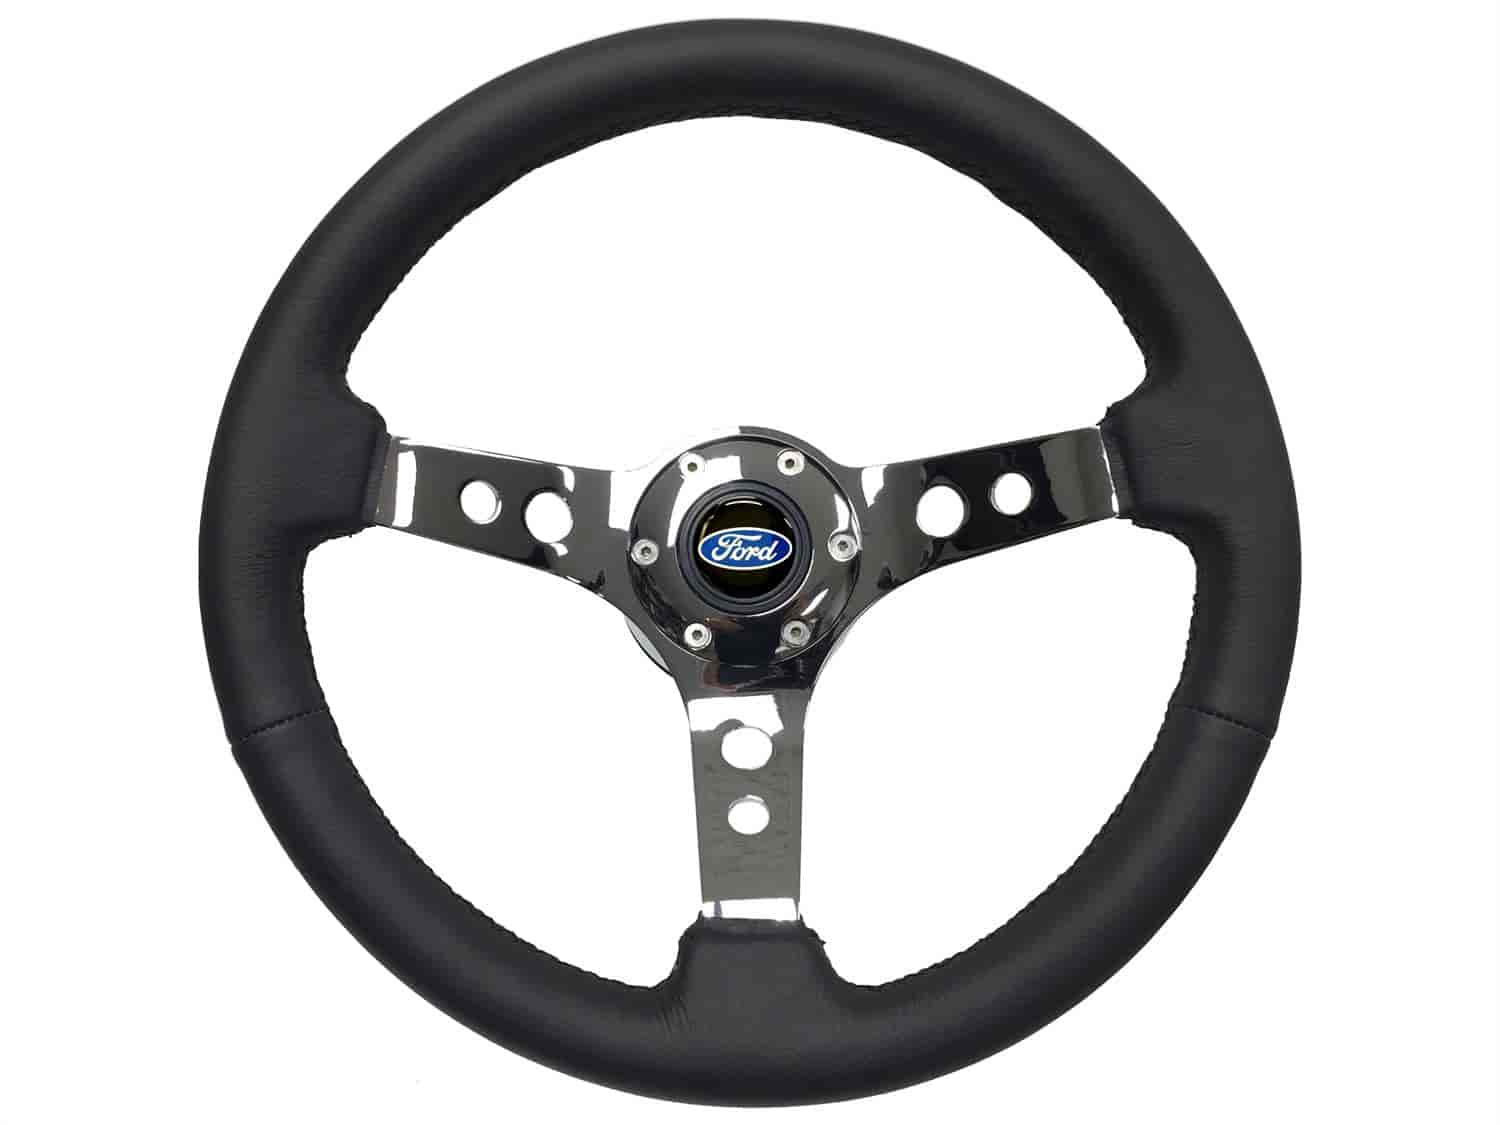 S6 Sport Steering Wheel Kit for 1964-1972 Ford/Mercury, 14 in. Diameter, Black Leather Grip, with 6-Bolt Adapter and Horn Button